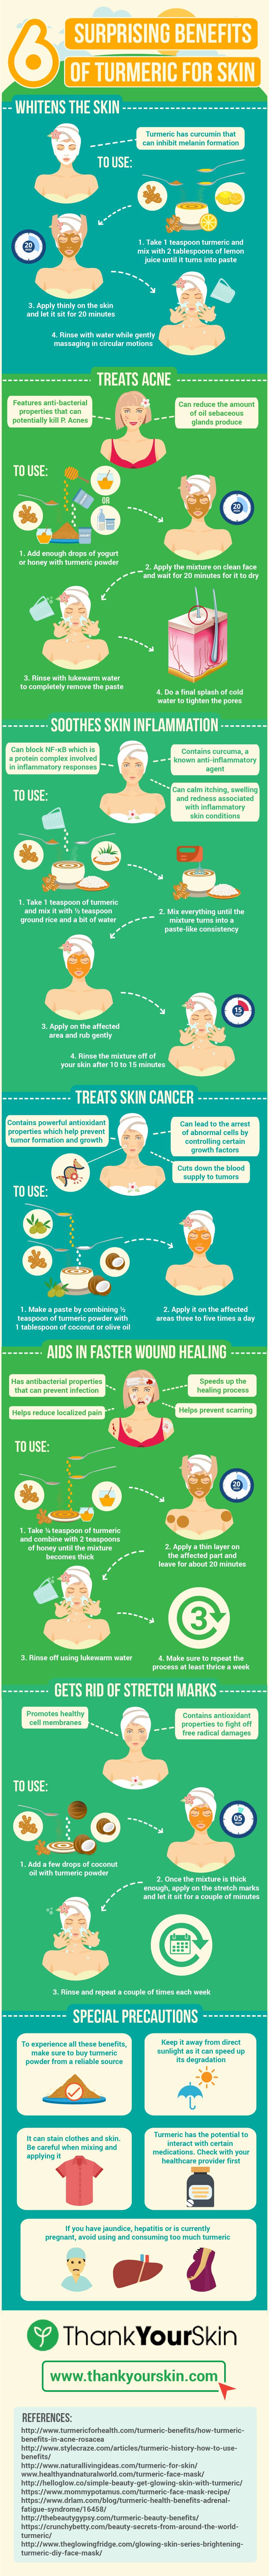 6 Amazing Ways Turmeric is Beneficial for Skin - Infographic